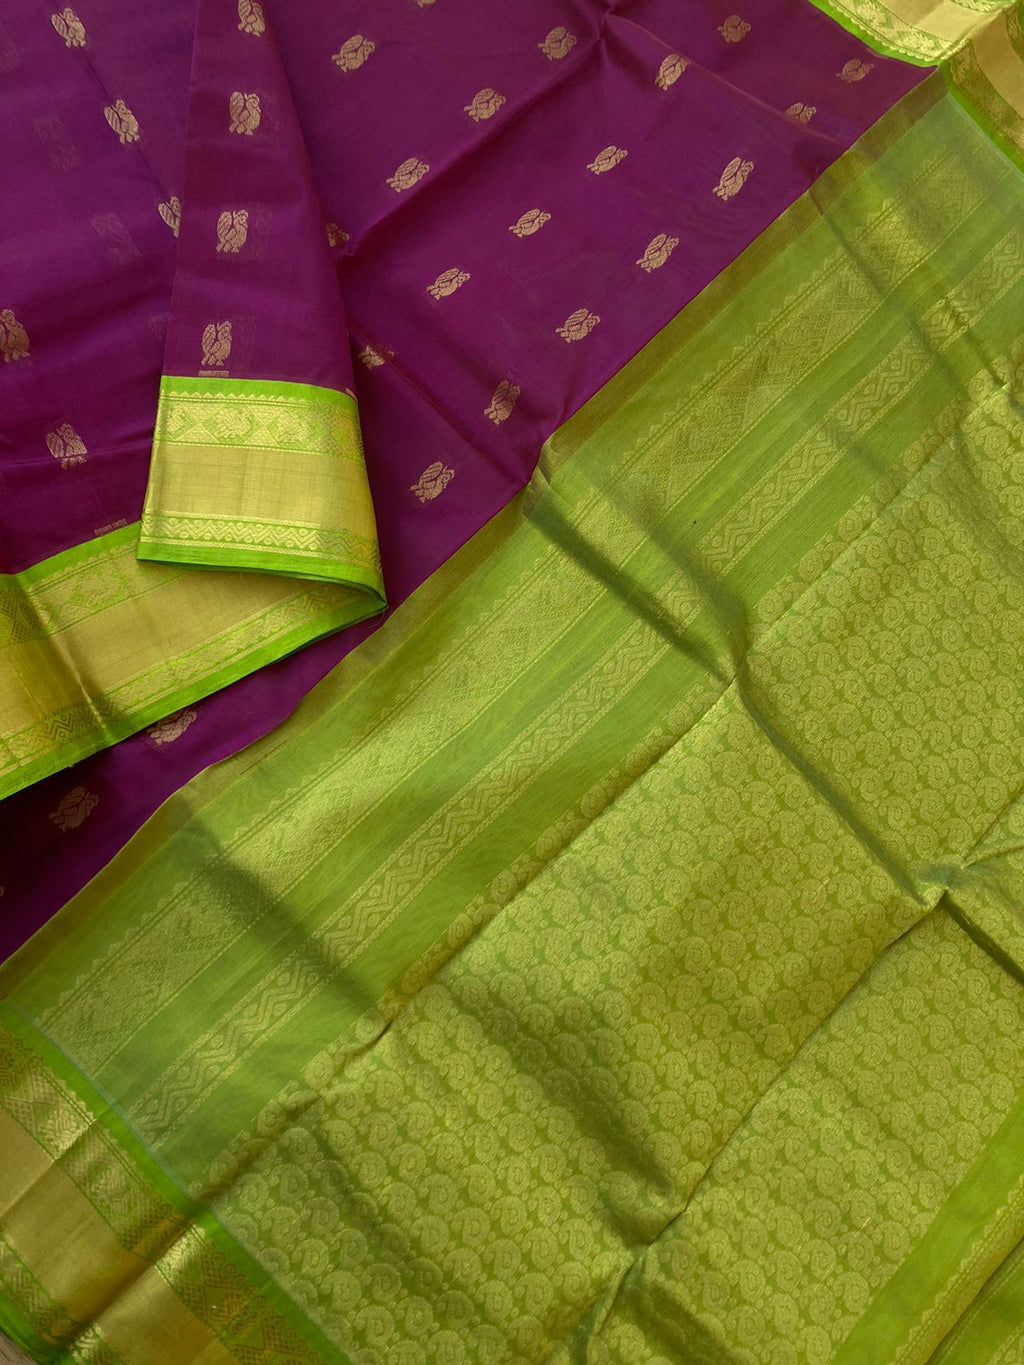 Korvai Silk Cottons - maroon mixed pink body and apple green pallu